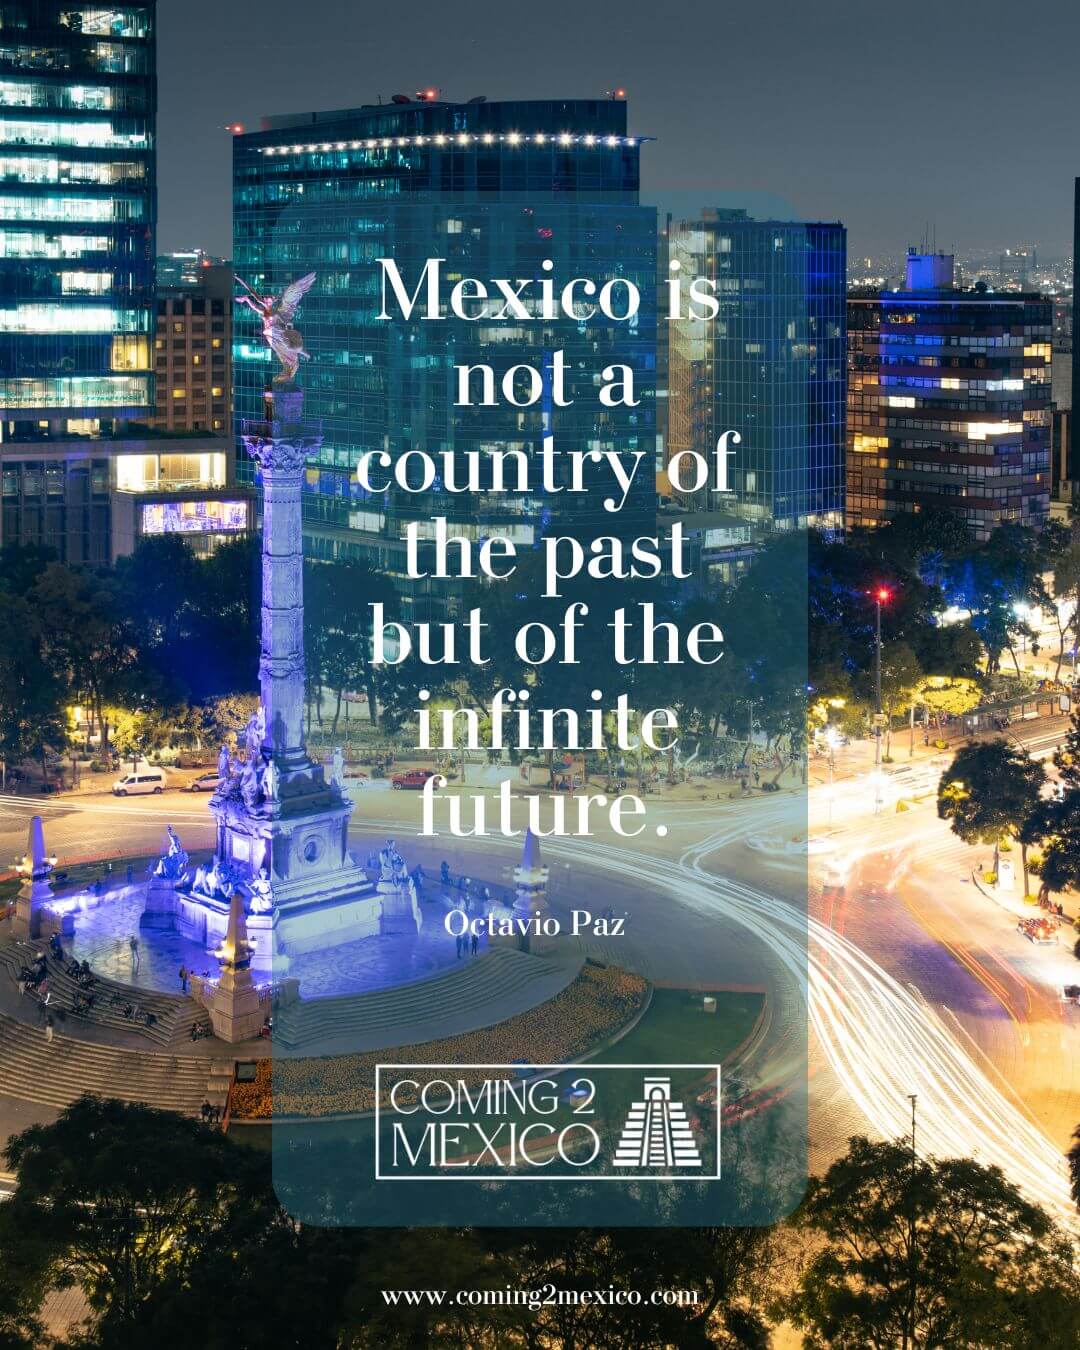 “Mexico is not a country of the past but of the infinite future.” – Octavio Paz